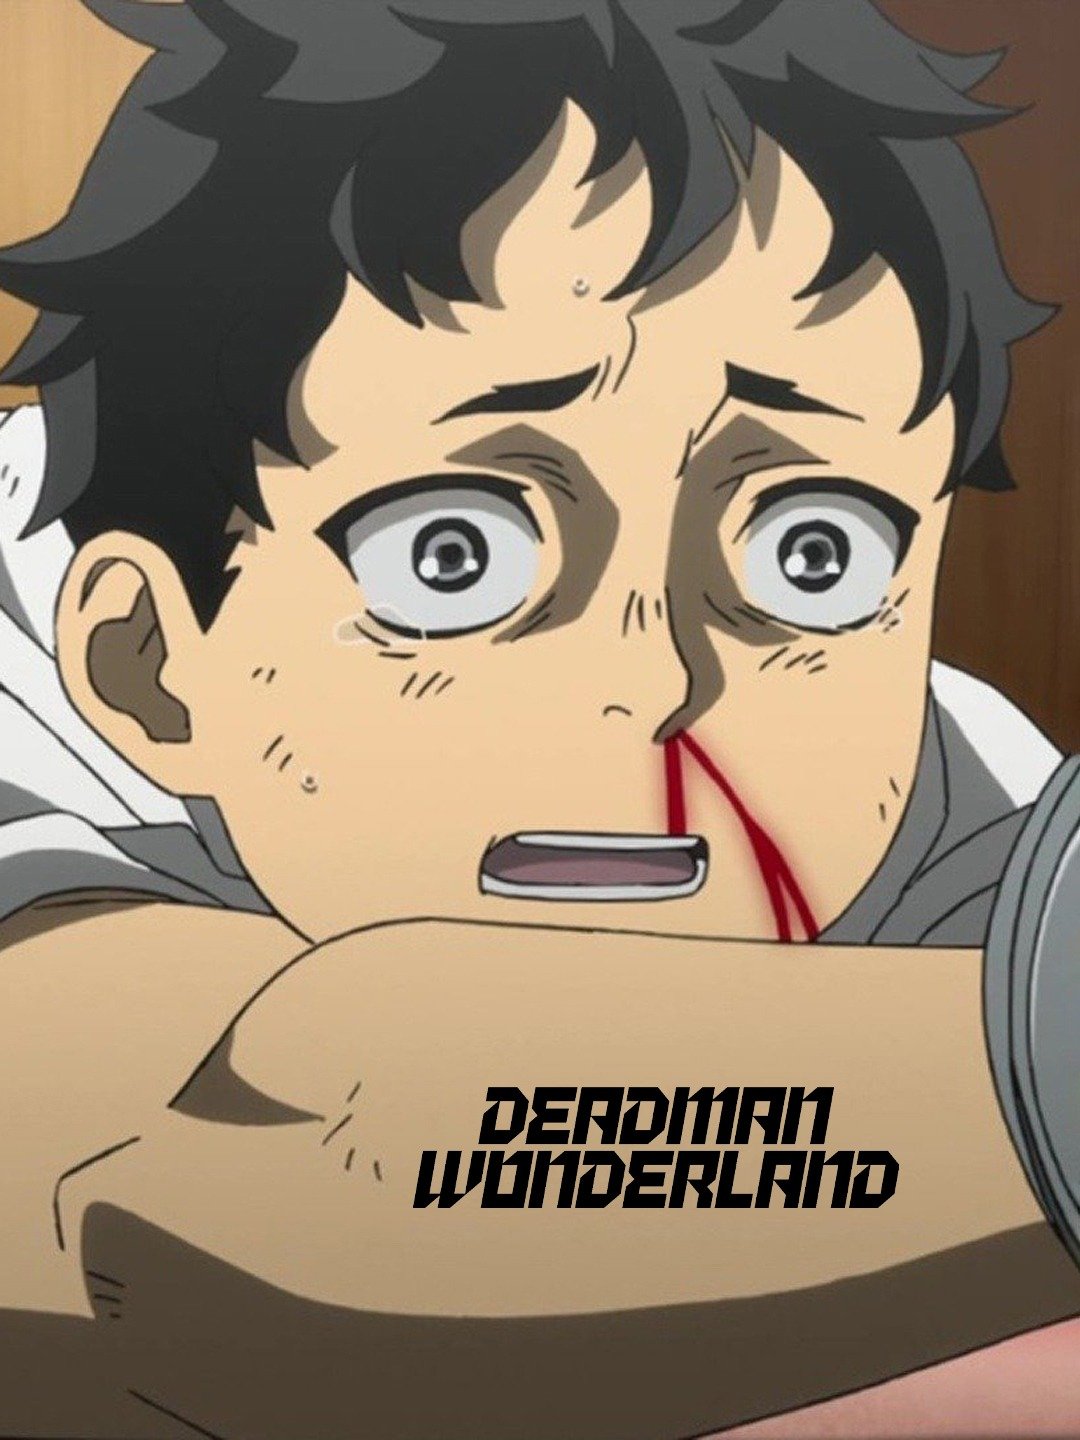 Deadman Wonderland is my favorite manga and anime ever. I'm simply obsessed  with it, it's an amazing story and has a great cast of characters. Love you Deadman  Wonderland❤❤❤ : r/deadmanwonderland